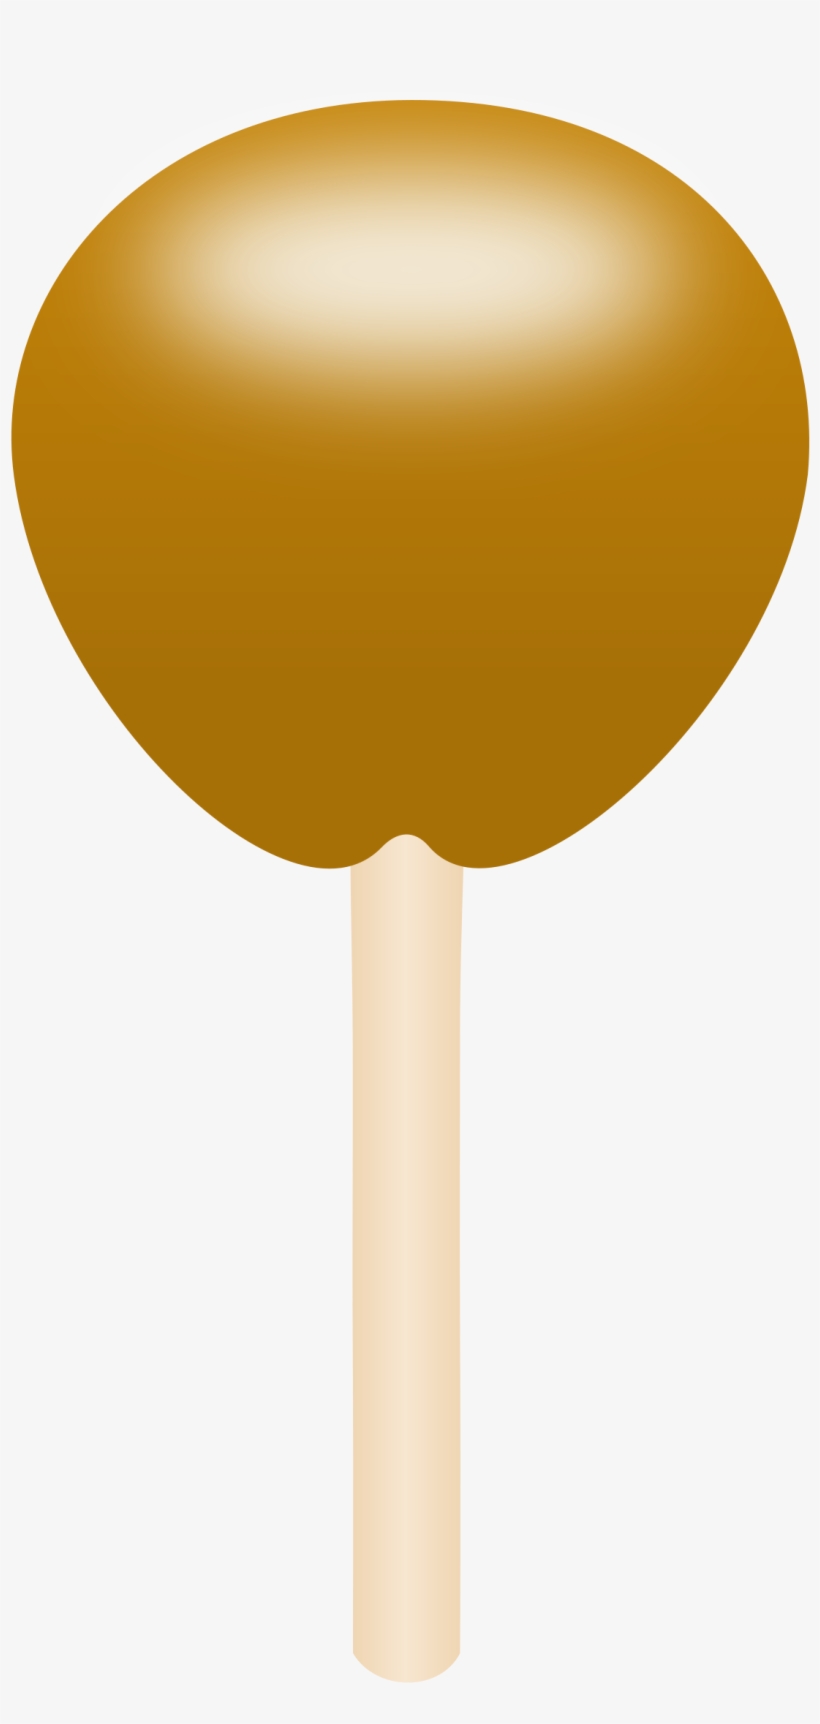 This Free Icons Png Design Of Caramel Apple, transparent png #3150166